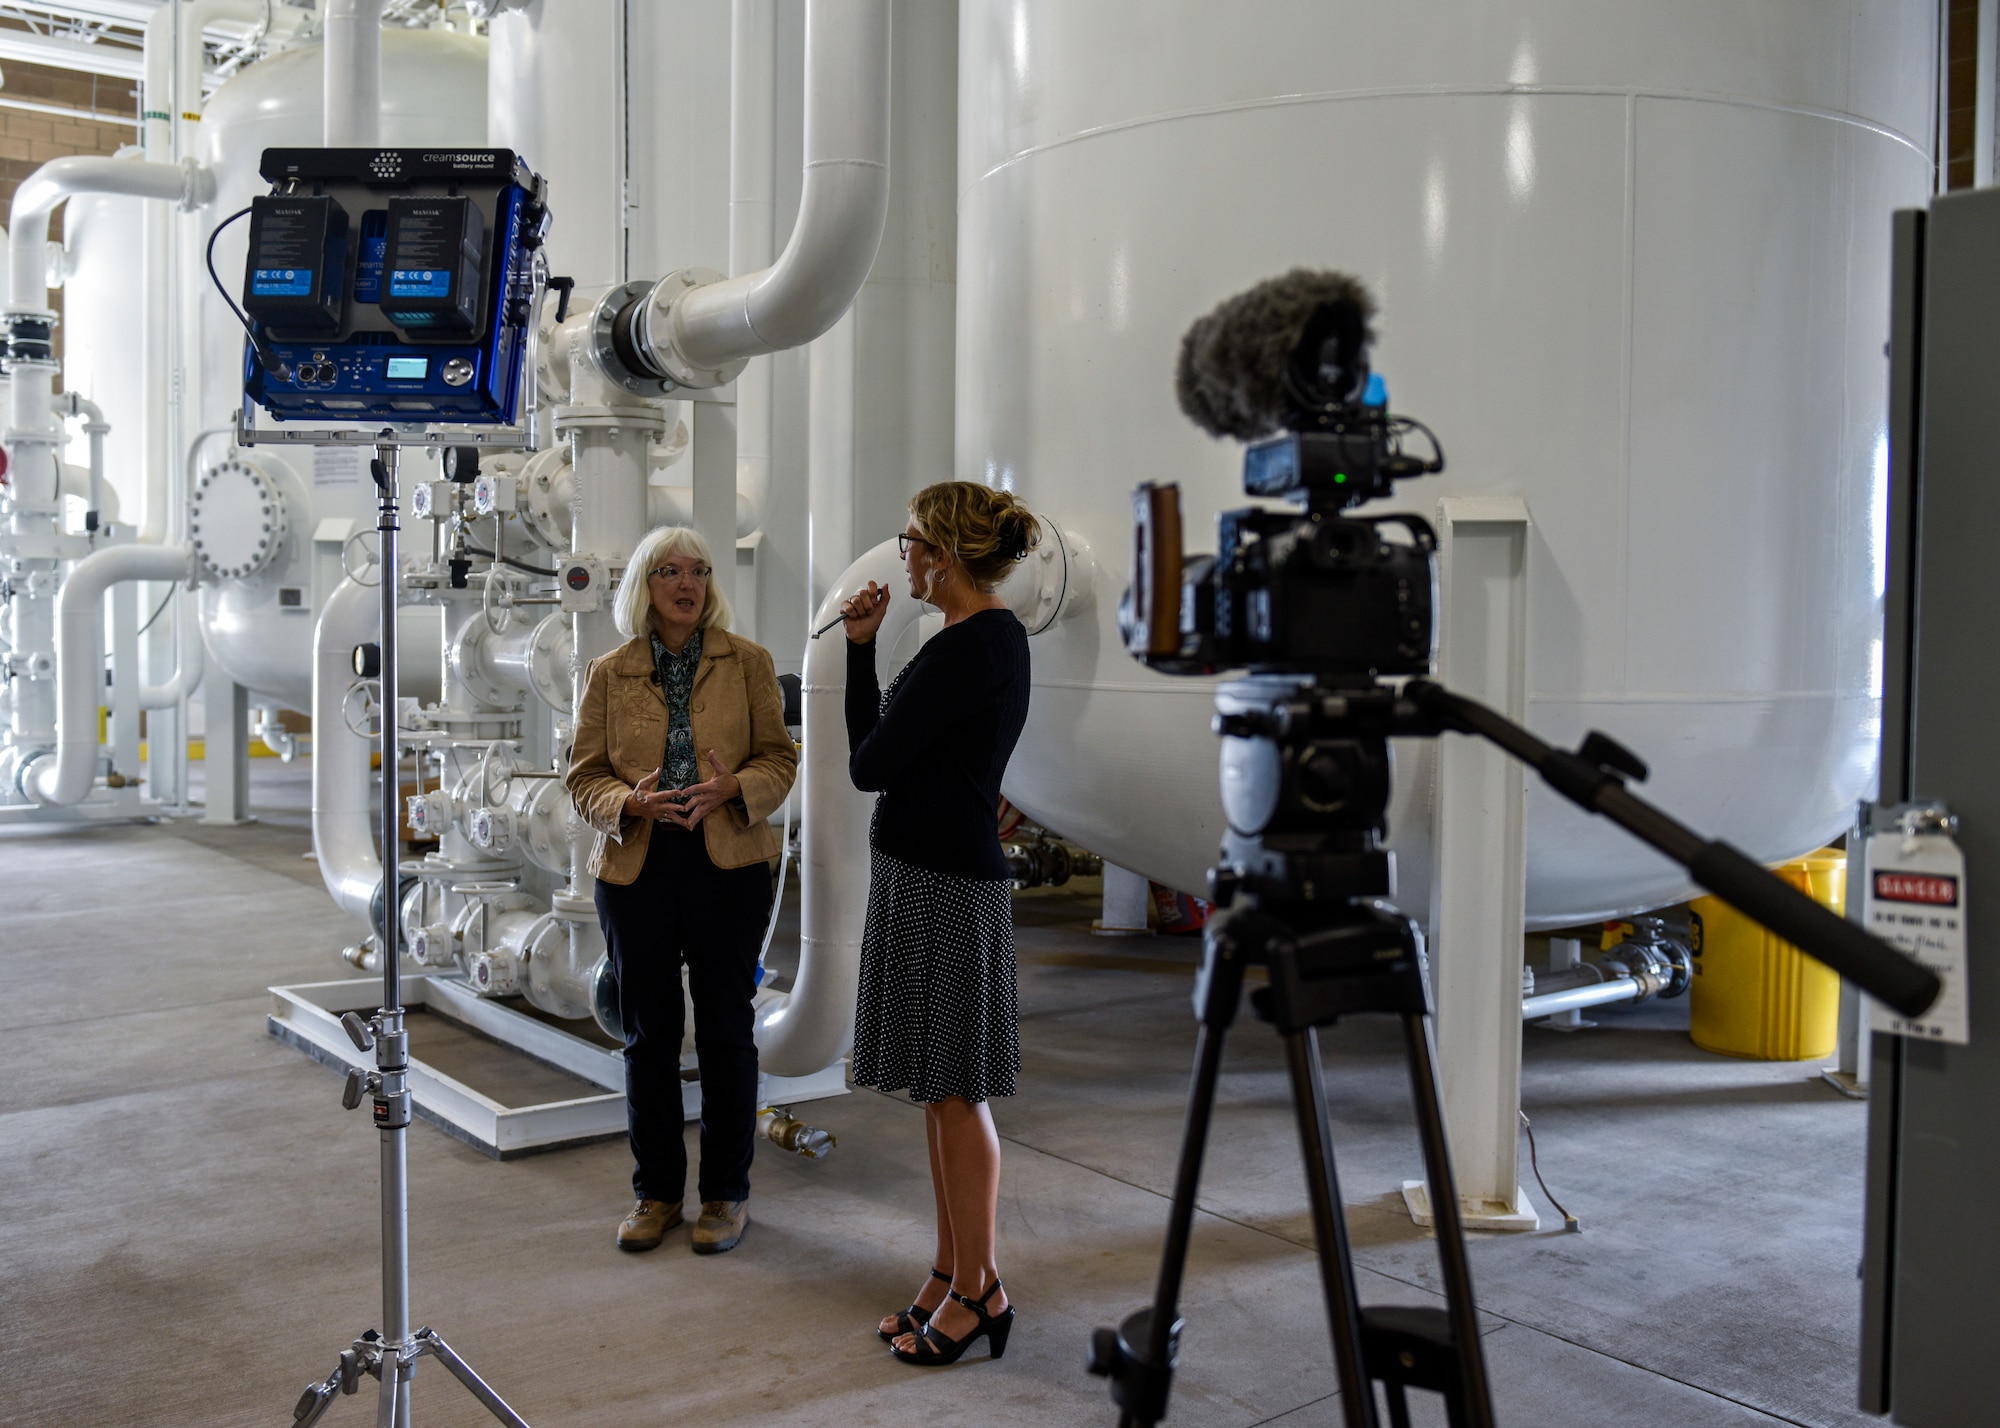 Kathryn Lynnes (left), Bulk Fuels Facility senior program manager, prepares for an interview with Laura Paskus (right), New Mexico Public Broadcasting Service correspondent, at Kirtland Air Force Base, N.M., Sept. 16, 2019. PBS filmed a news story at Kirtland’s groundwater treatment facility concerning what has been done to clean up the fuel spill. (U.S. Air Force photo by Airman 1st Class Austin J. Prisbrey)